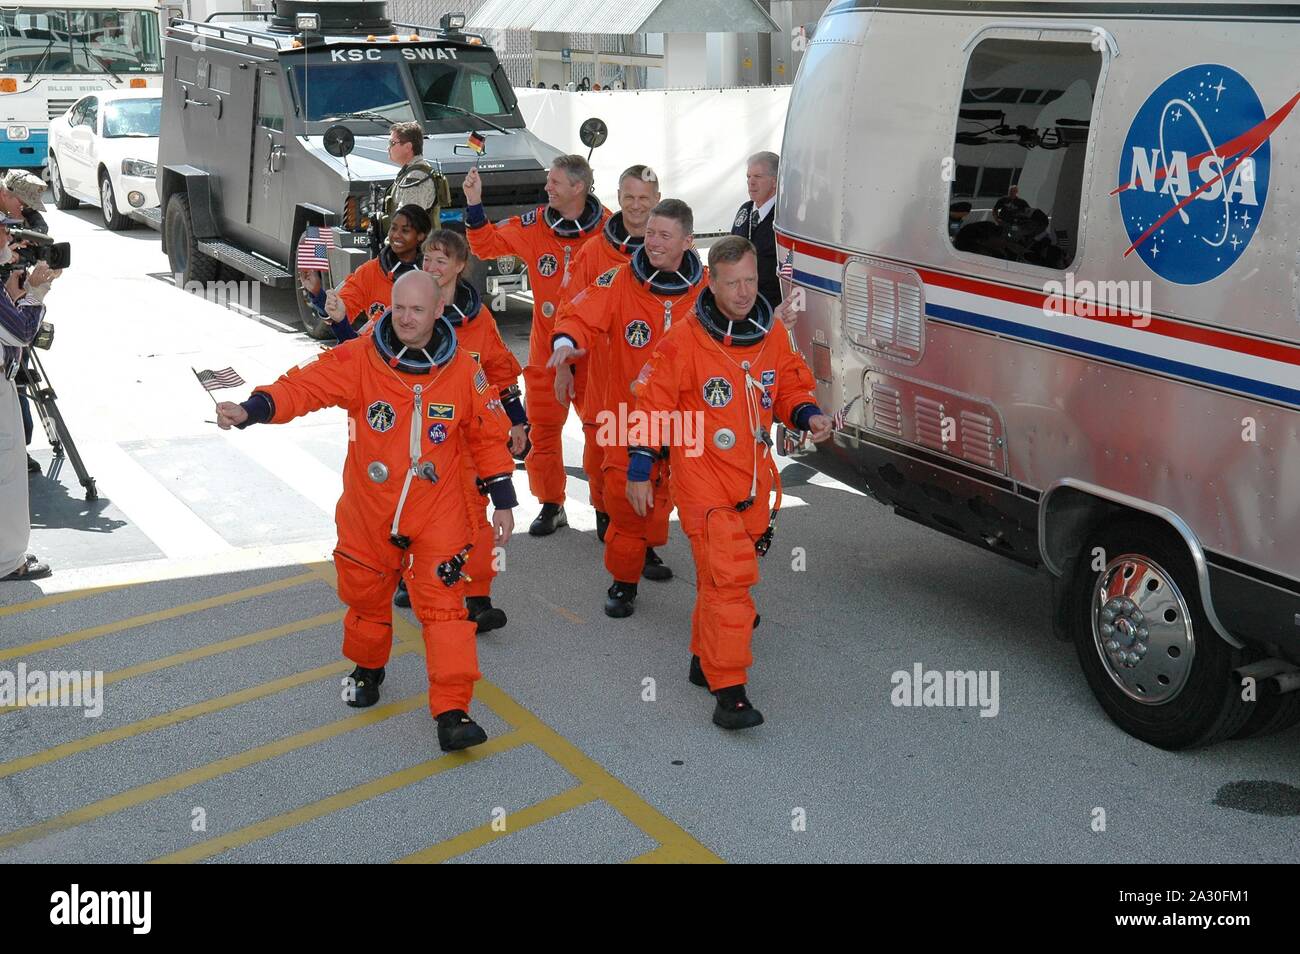 FILE: In this photo released by NASA, waving flags for the Fourth of July, the STS-121 crew heads for the Astrovan and the ride to Launch Pad 39B at the Kennedy Space Center, Florida on July 4, 2006 for a third launch attempt. Leading the way are Pilot Mark Kelly (left) and Commander Steven Lindsey (right). Behind them are, left and right, Mission Specialists (second row) Lisa Nowak and Michael Fossum; (third row) Stephanie Wilson and Piers Sellers; and (at the rear) Thomas Reiter, who represents the European Space Agency. The launch of Space Shuttle Discovery on mission STS-121 is the 115th s Stock Photo